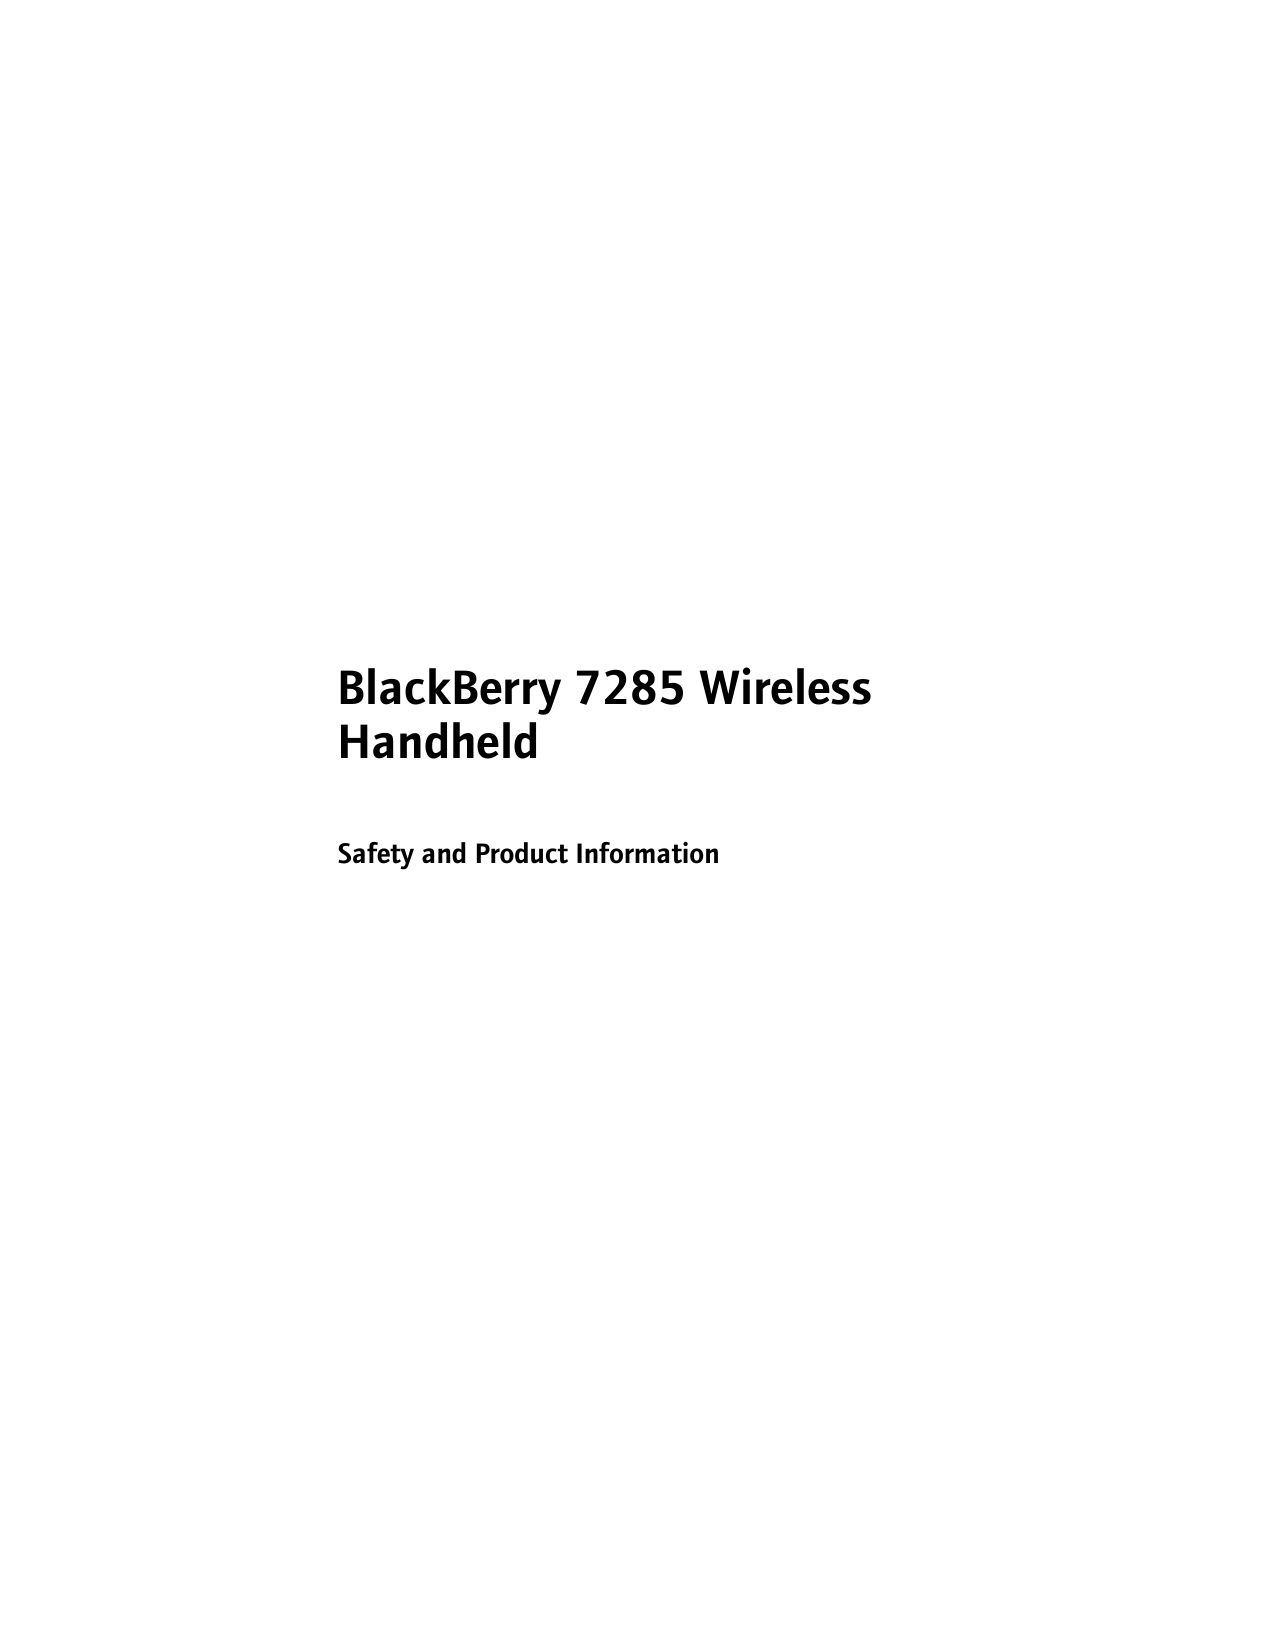 BlackBerry 7285 Wireless HandheldSafety and Product Information 